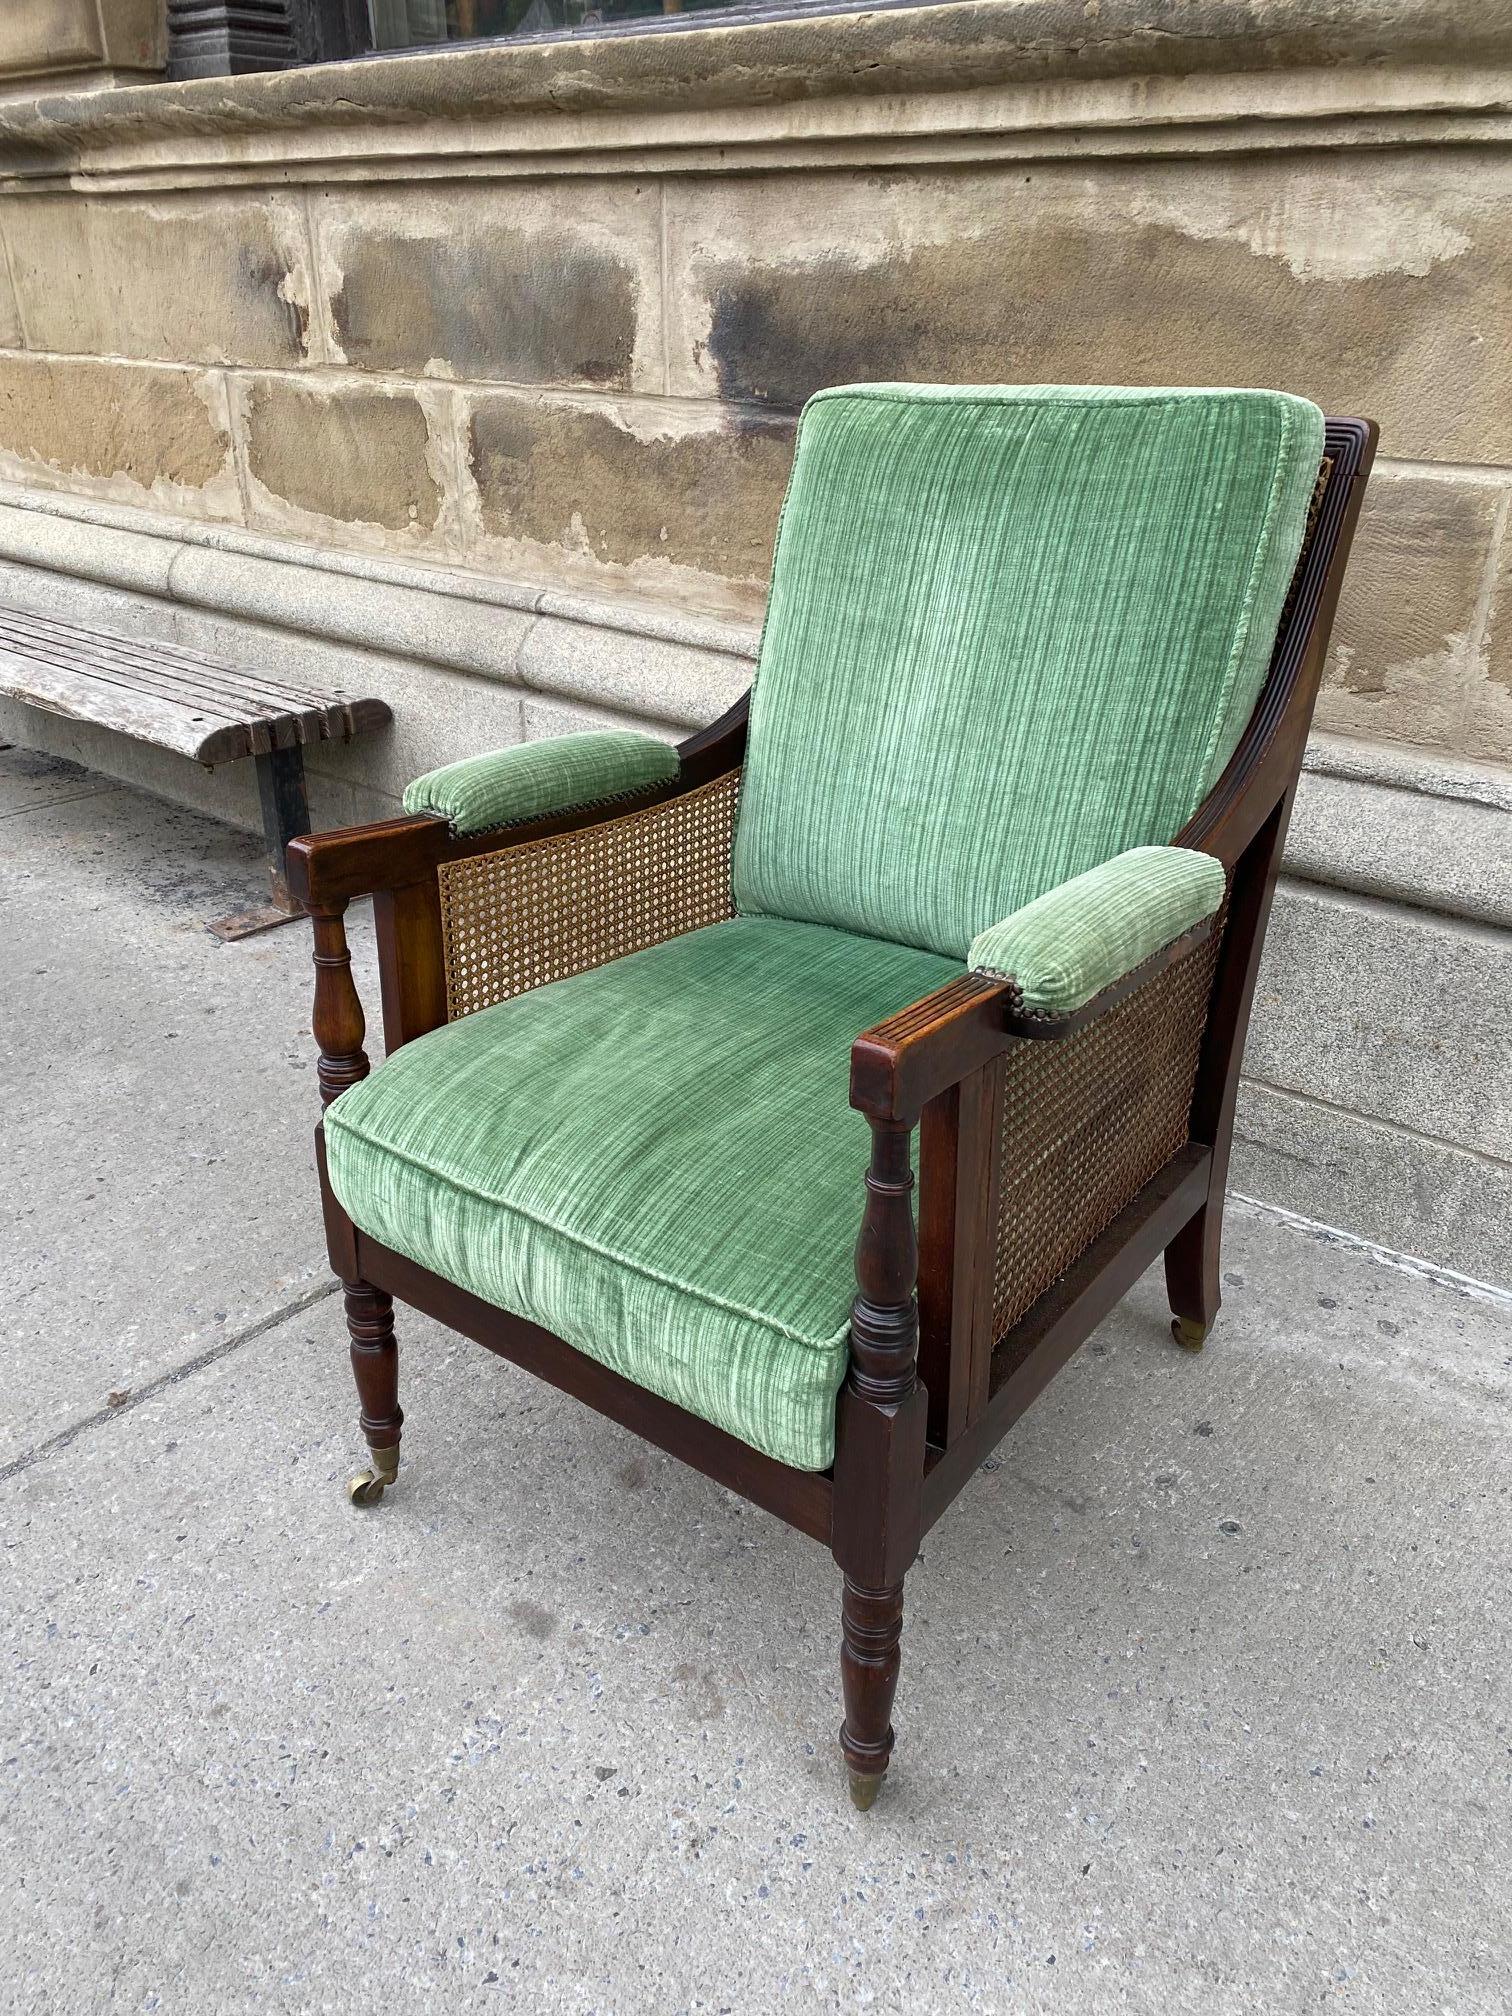 Mahogany Regency Period Large Caned Library Chair In Good Condition For Sale In Montreal, QC